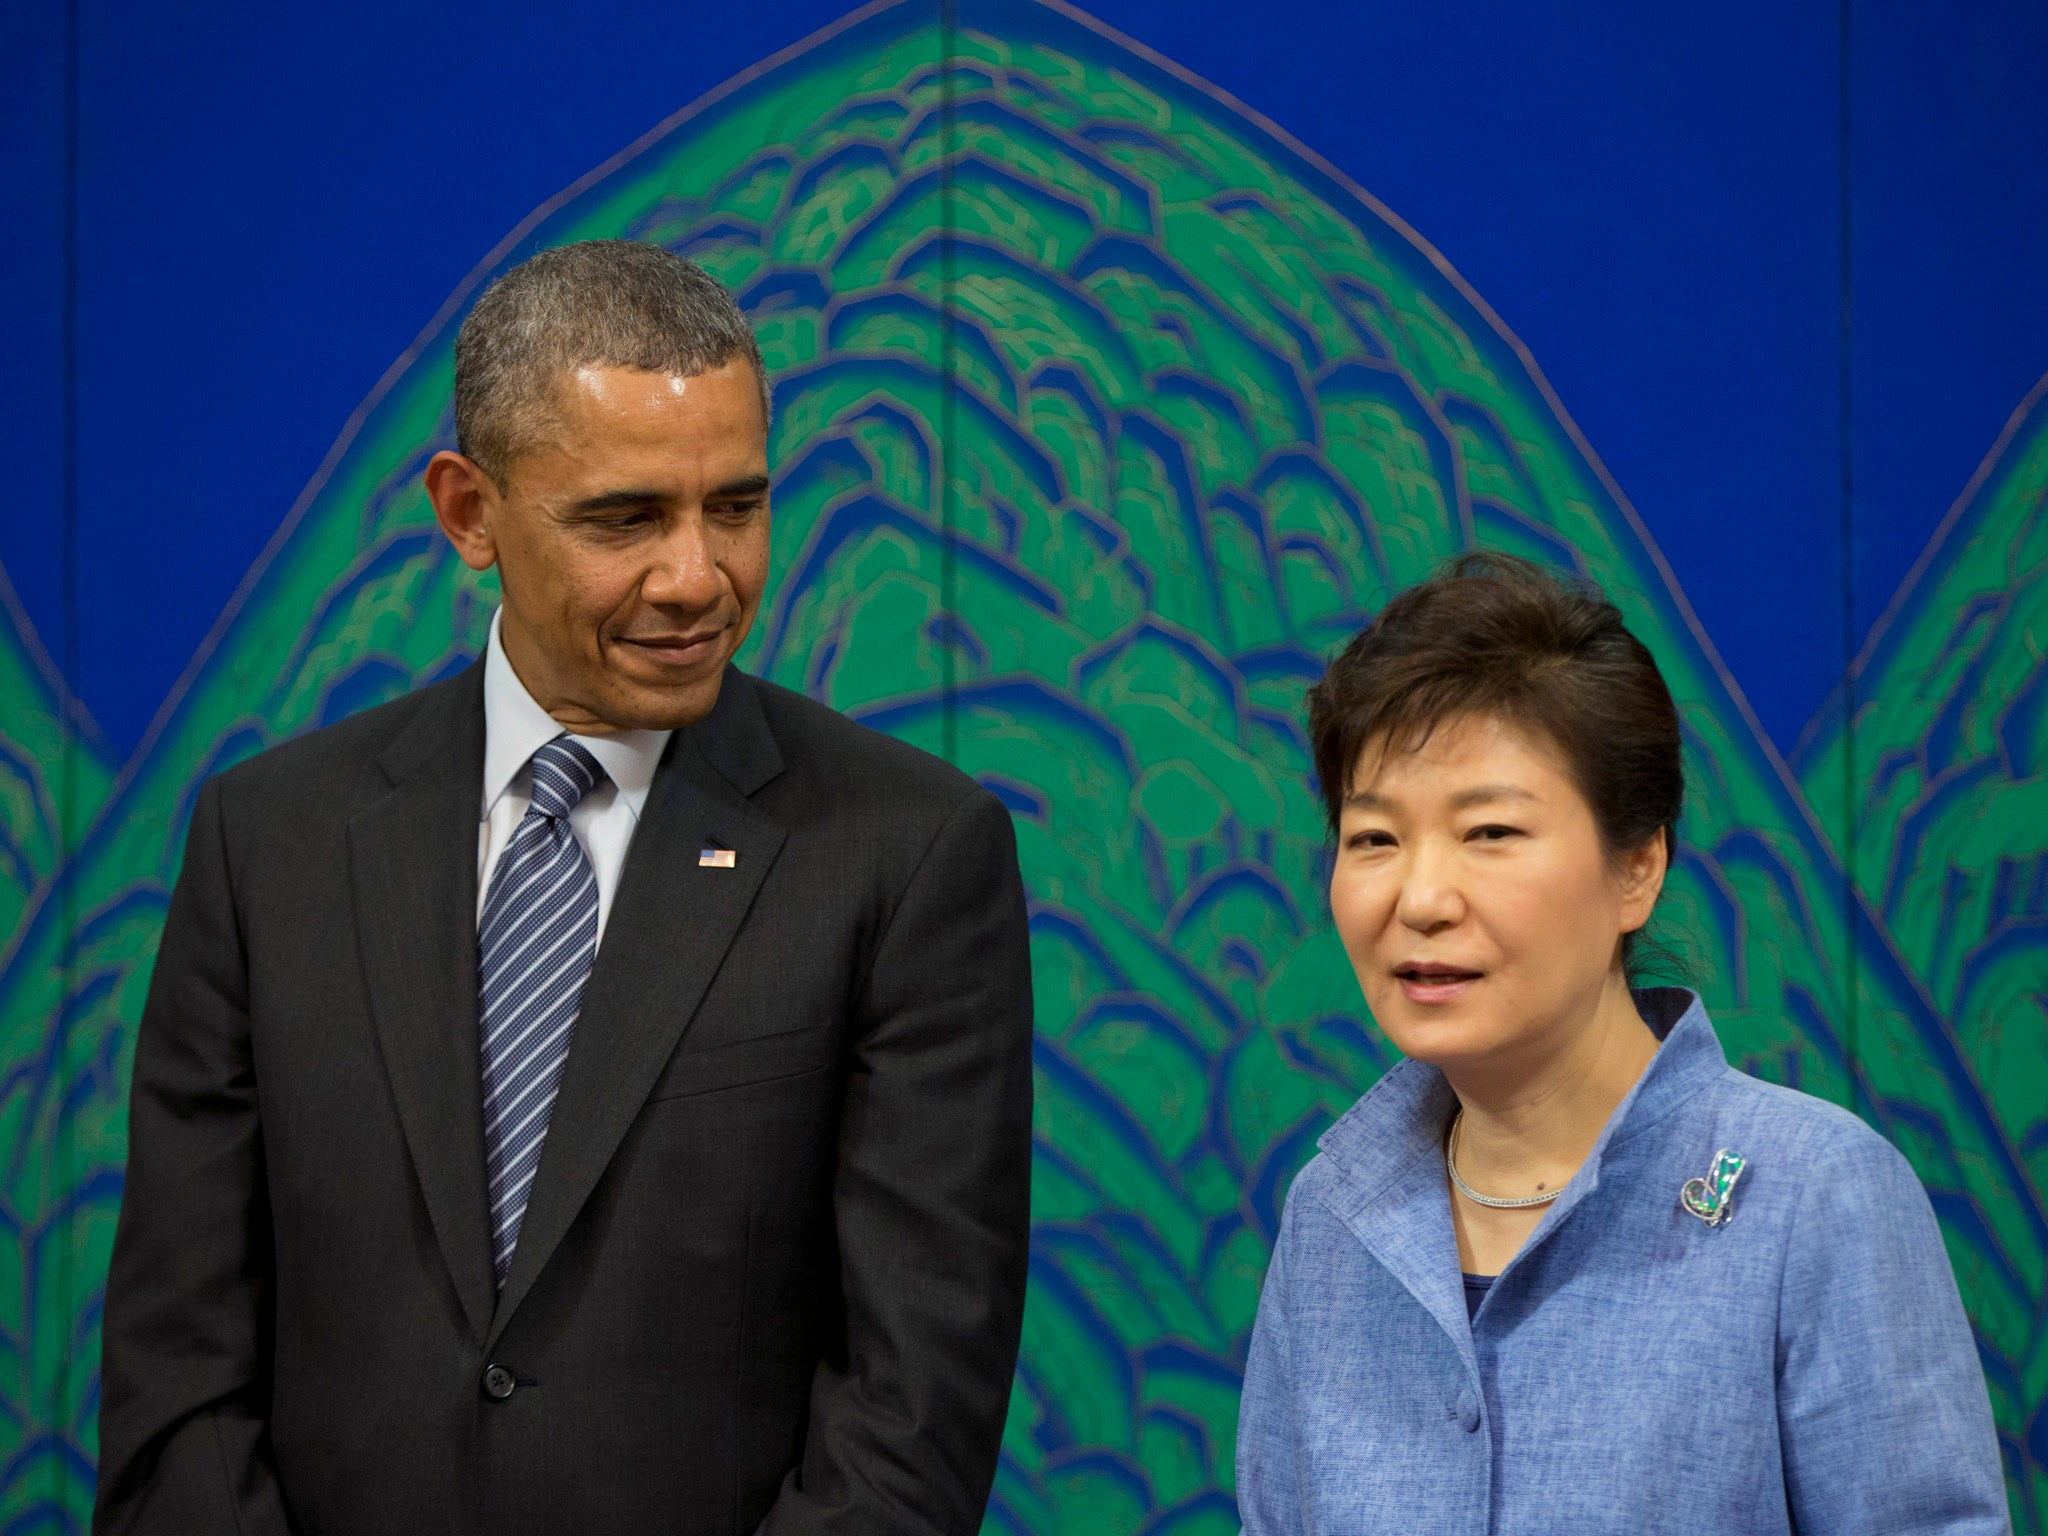 President Barack Obama with South Korean President Park Geun-hye during his recent visit to the country